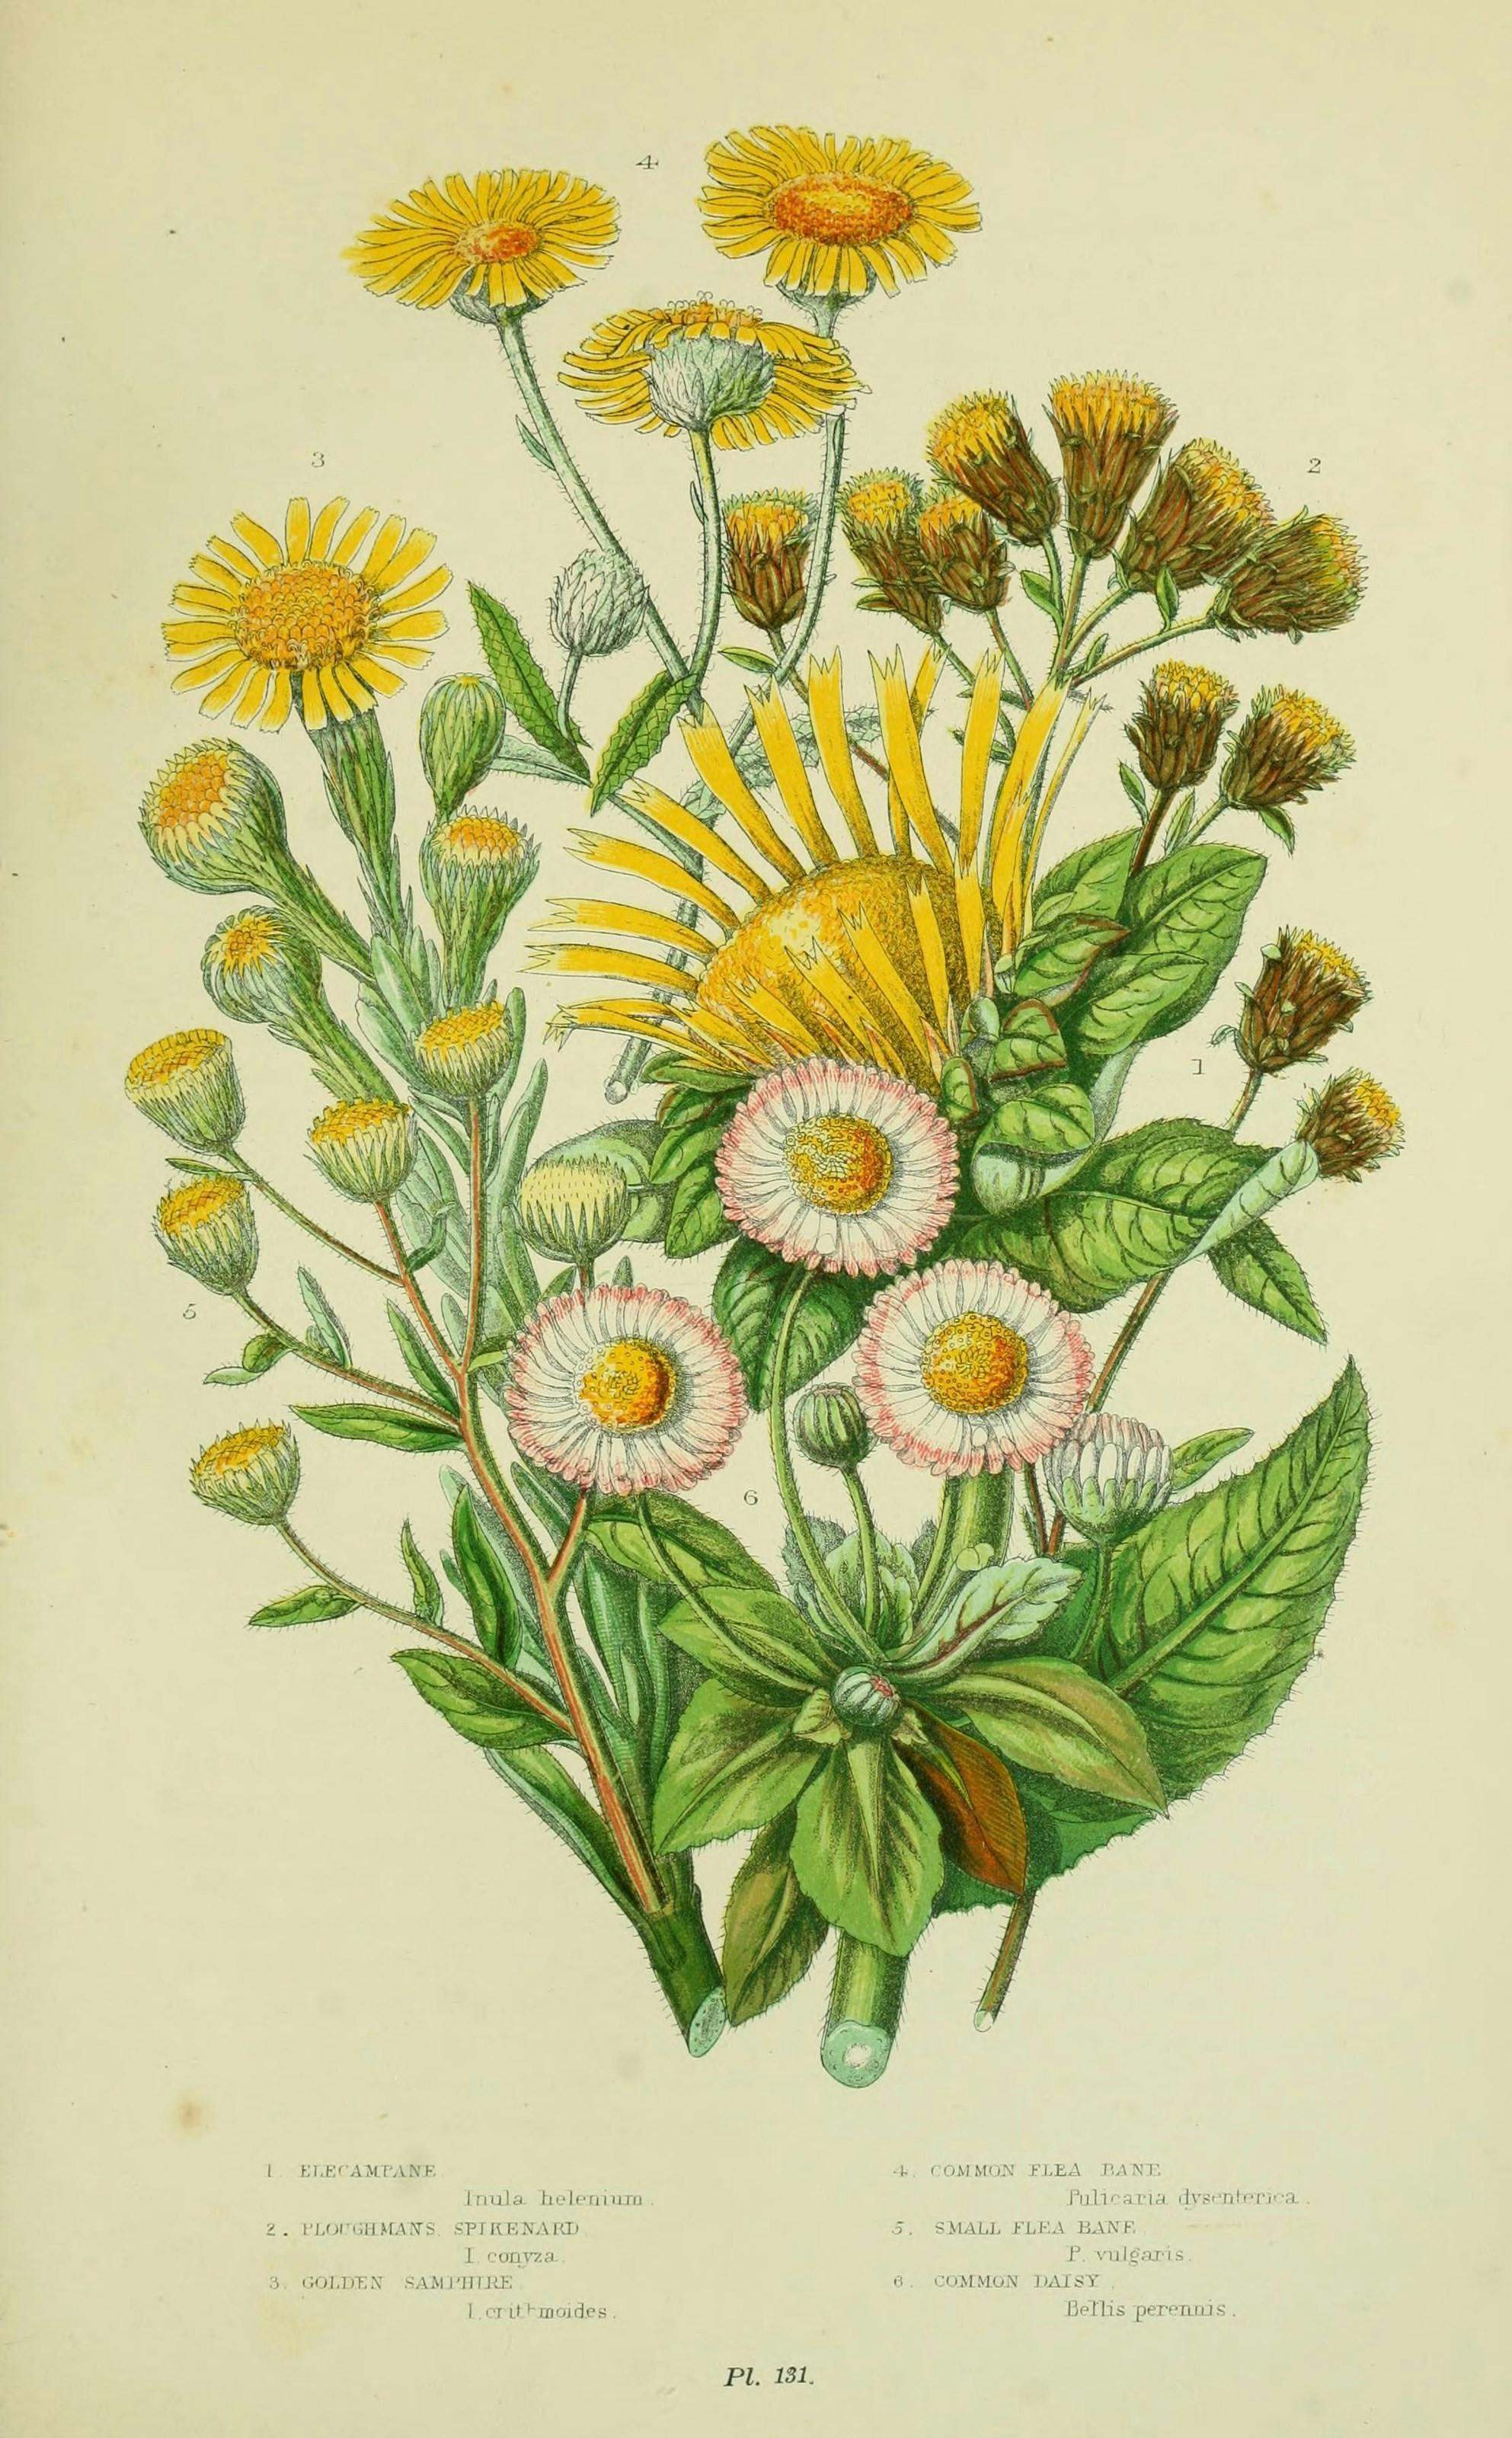 Botanical illustration of a bunch of yellow flowers, with three with and pink flowers in the center. The arrangement includes golden samphires, daisies, and flea banes.